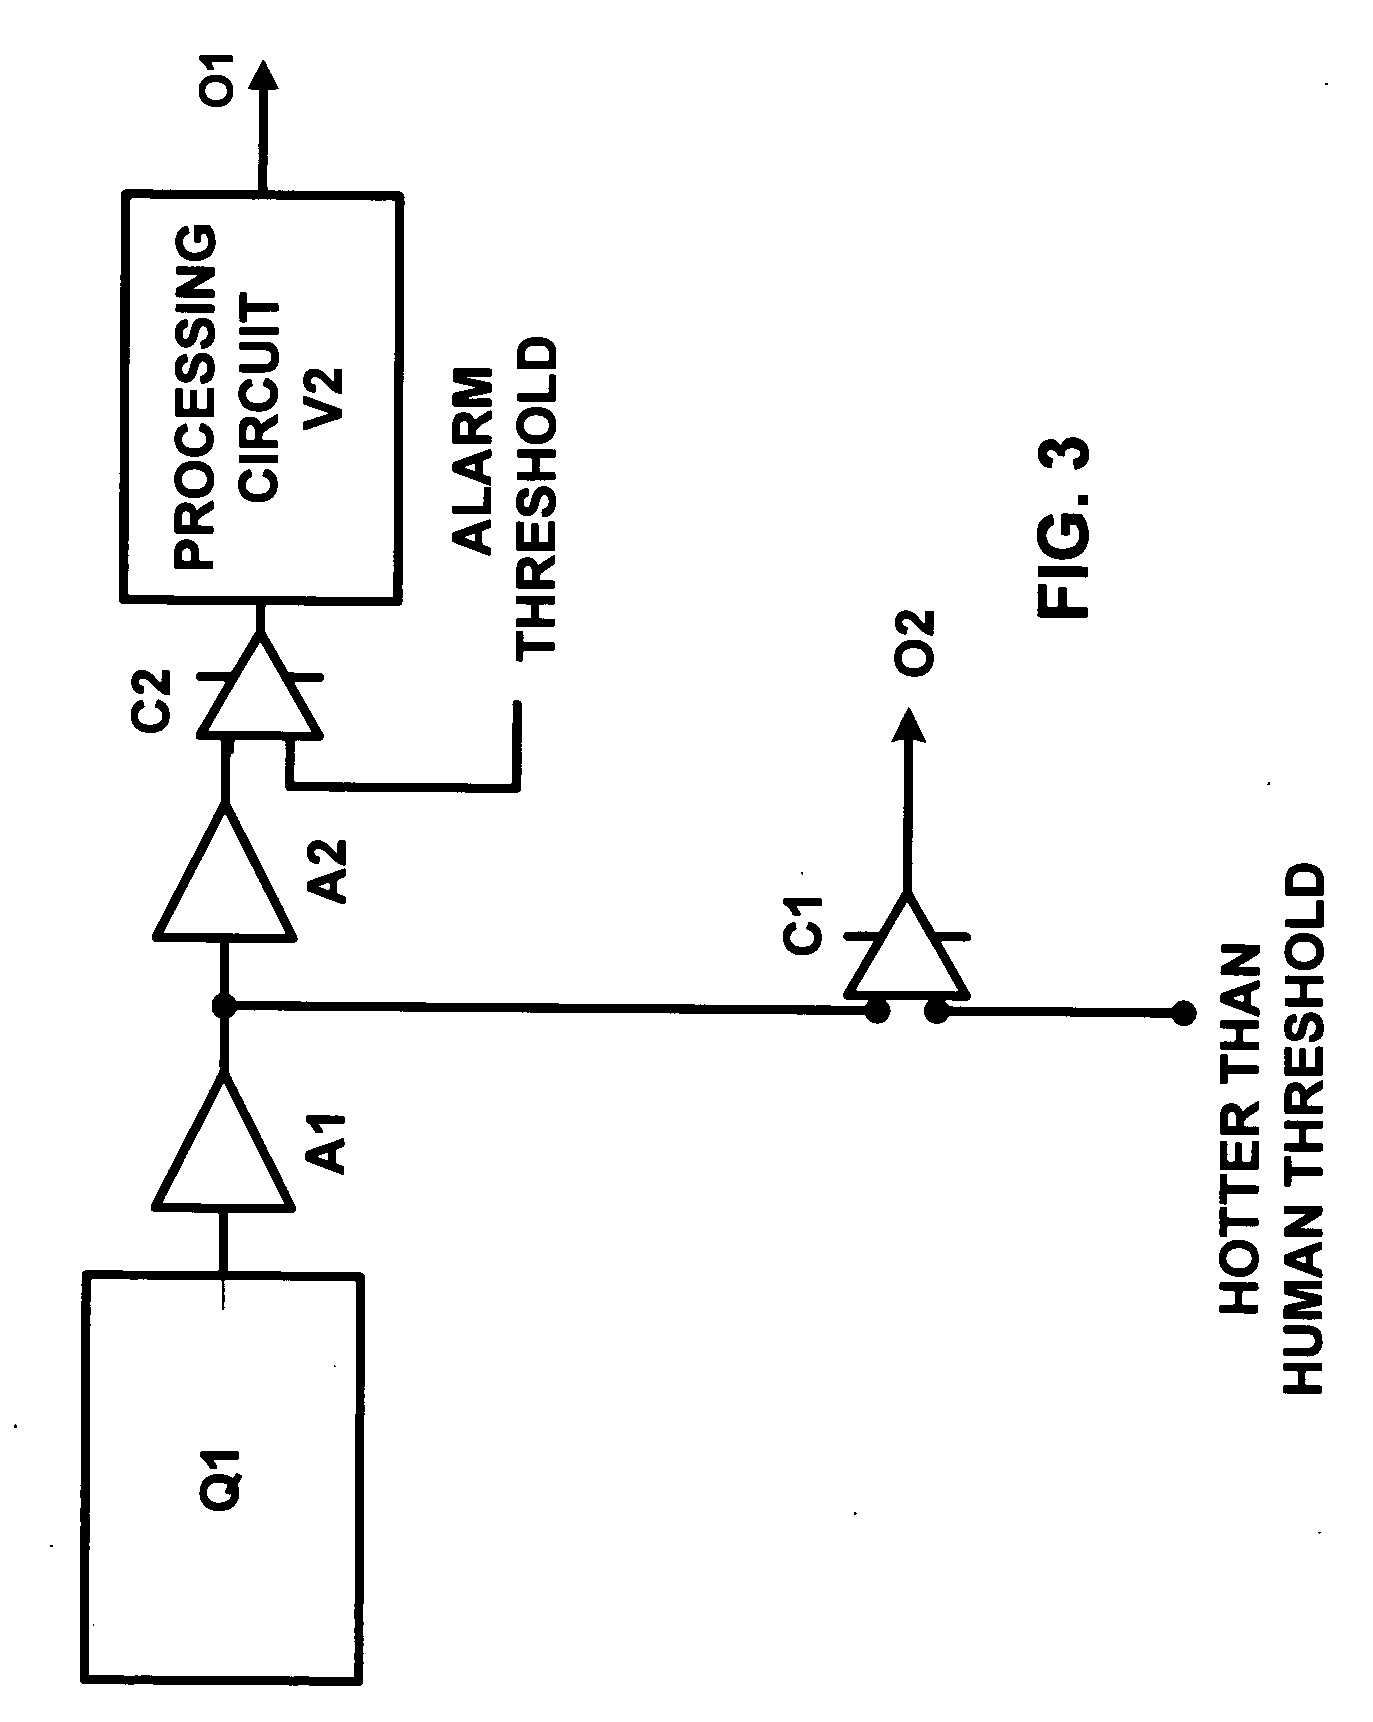 Method and apparatus for large signal detection passive infrared sensor applications